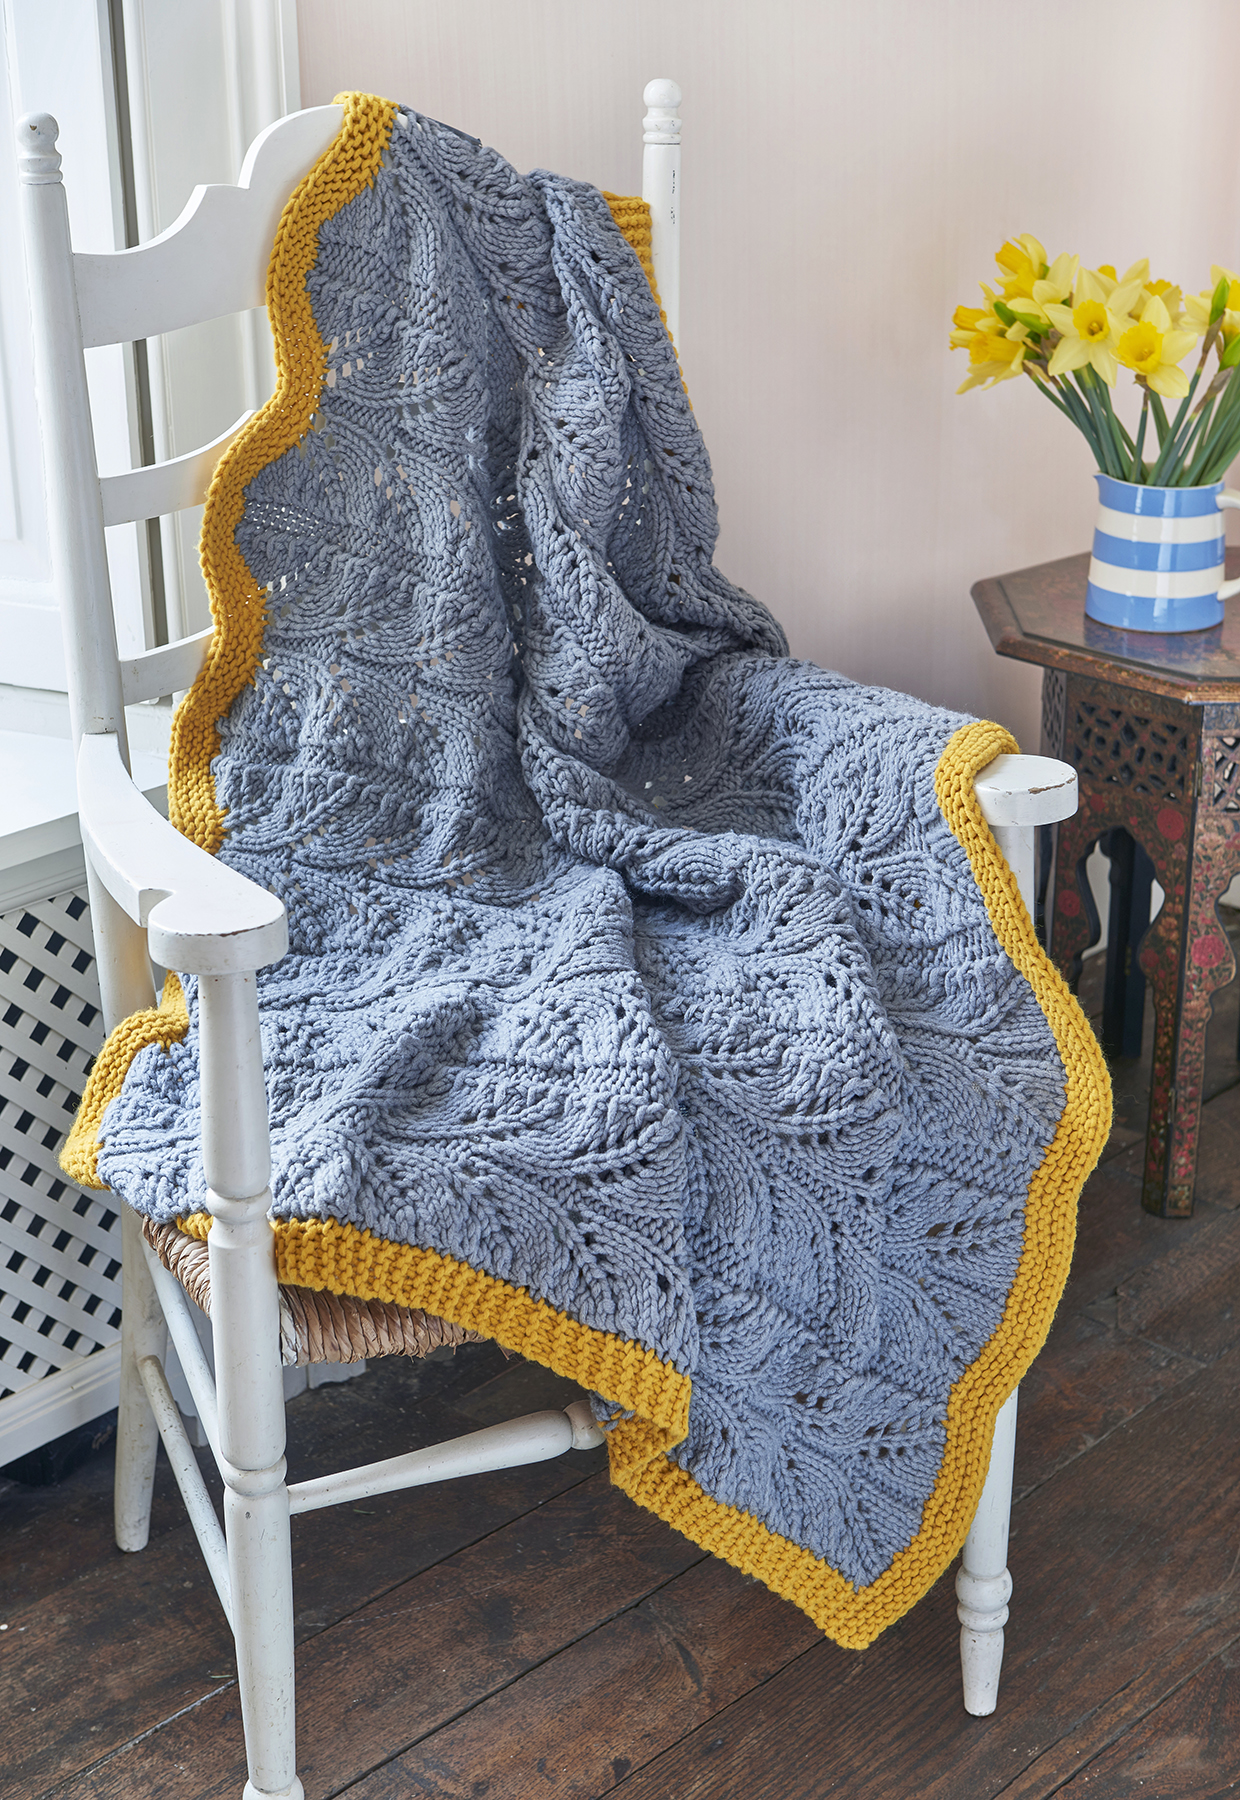 a blue and yellow lace blanket is thrown over the seat and back of a chair